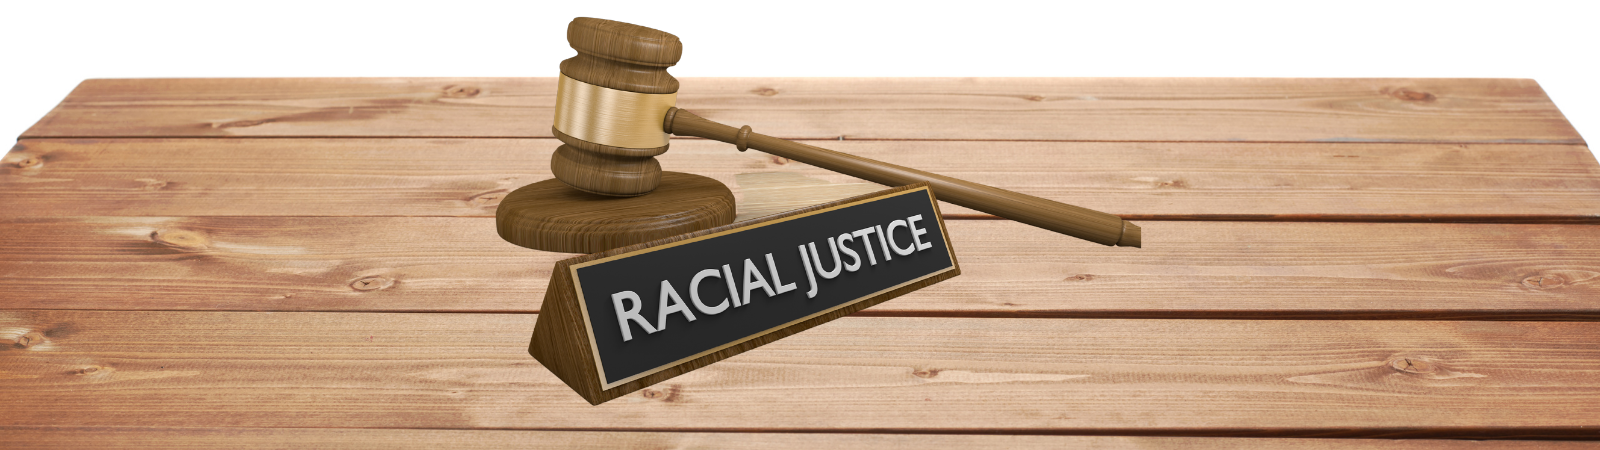 racial justice banner image